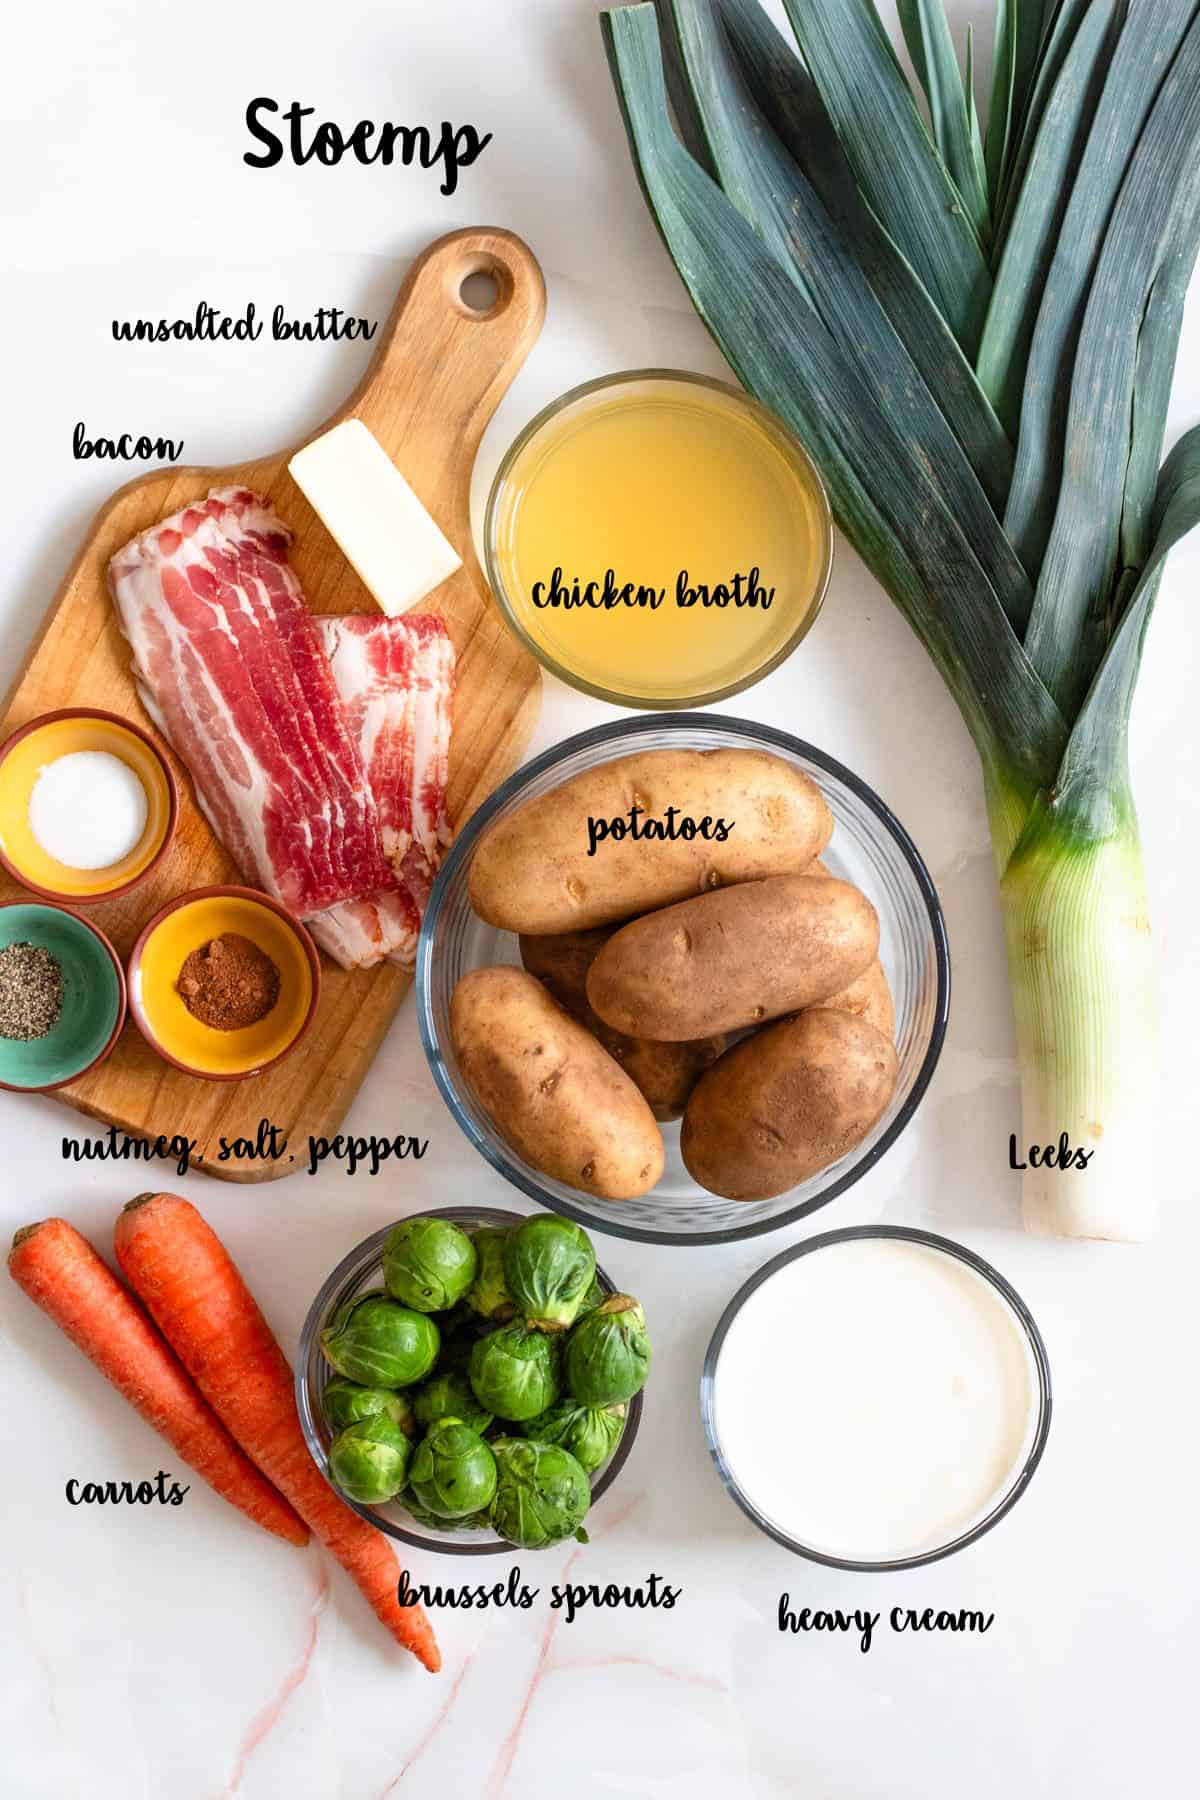 Ingredients shown are used to prepare stoemp.